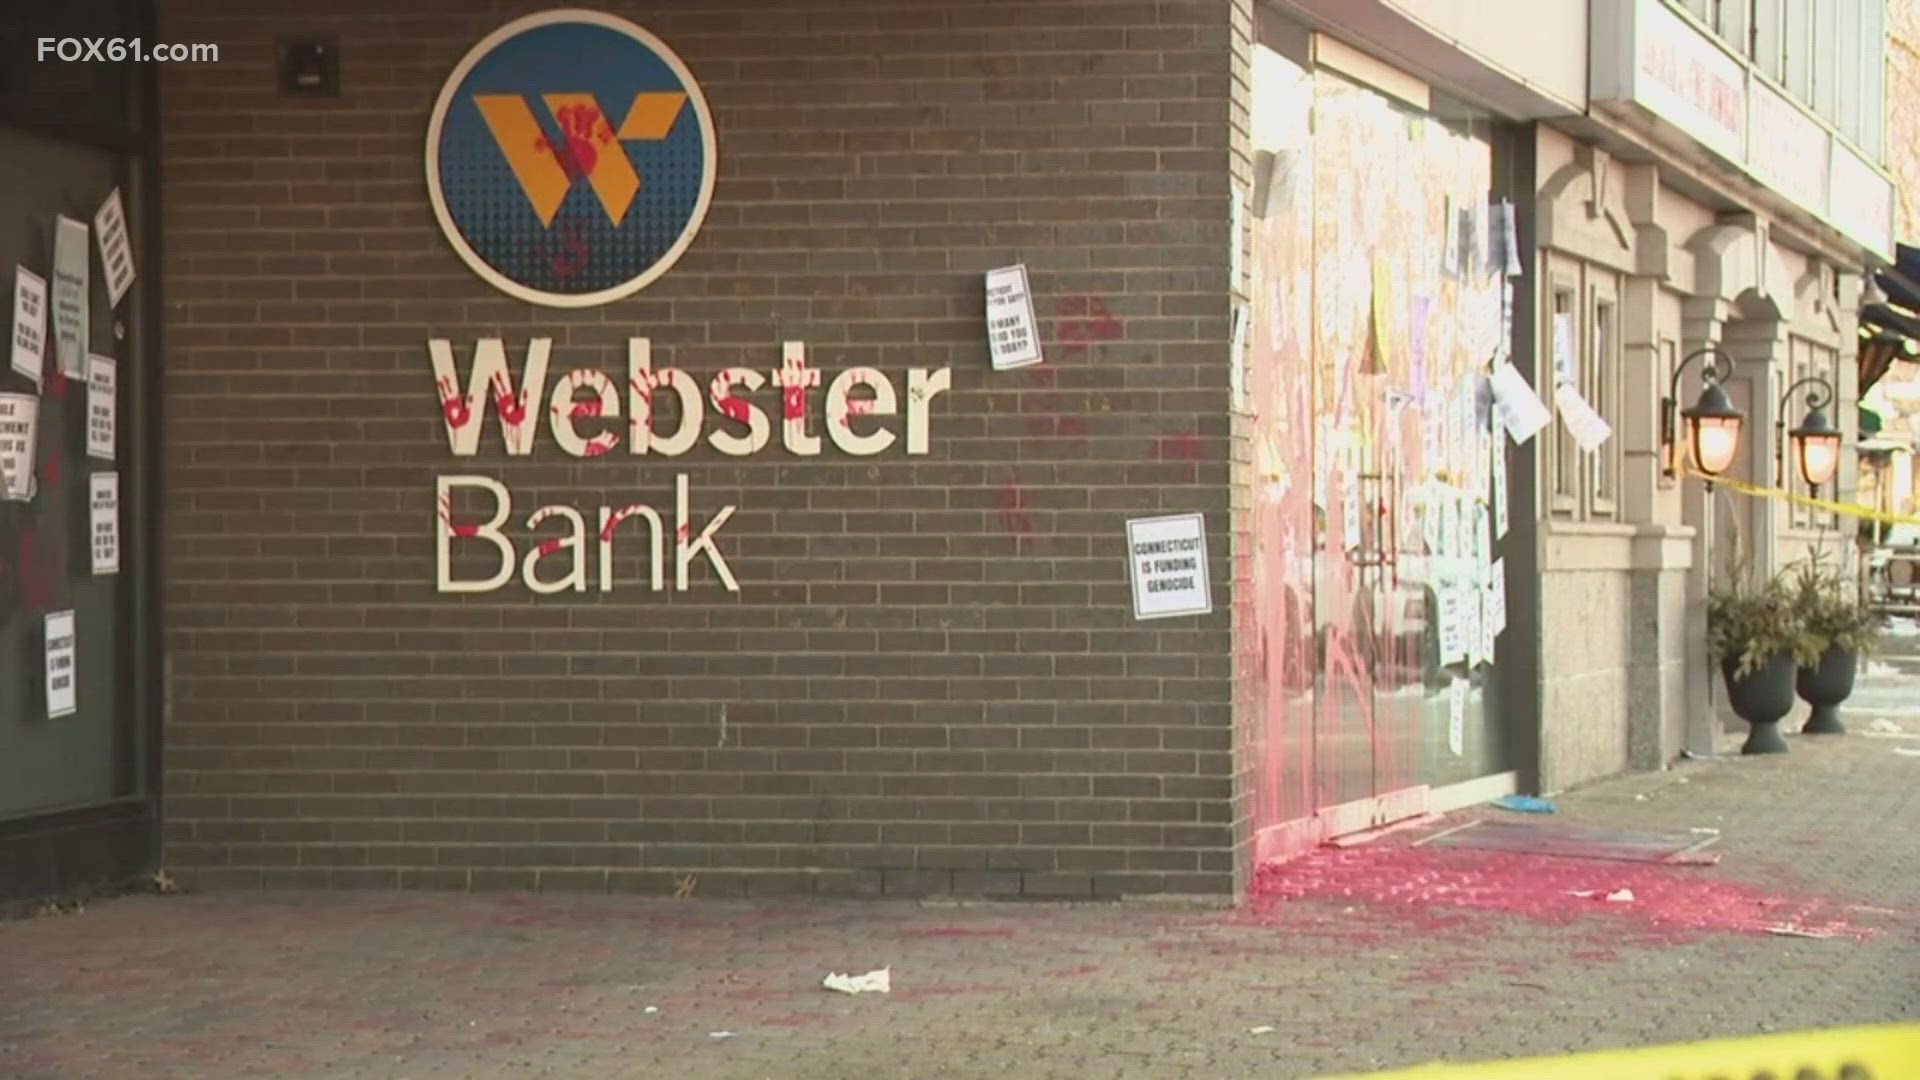 During a Israel-Hamas war rally, red paint was splashed on the outside of some businesses.